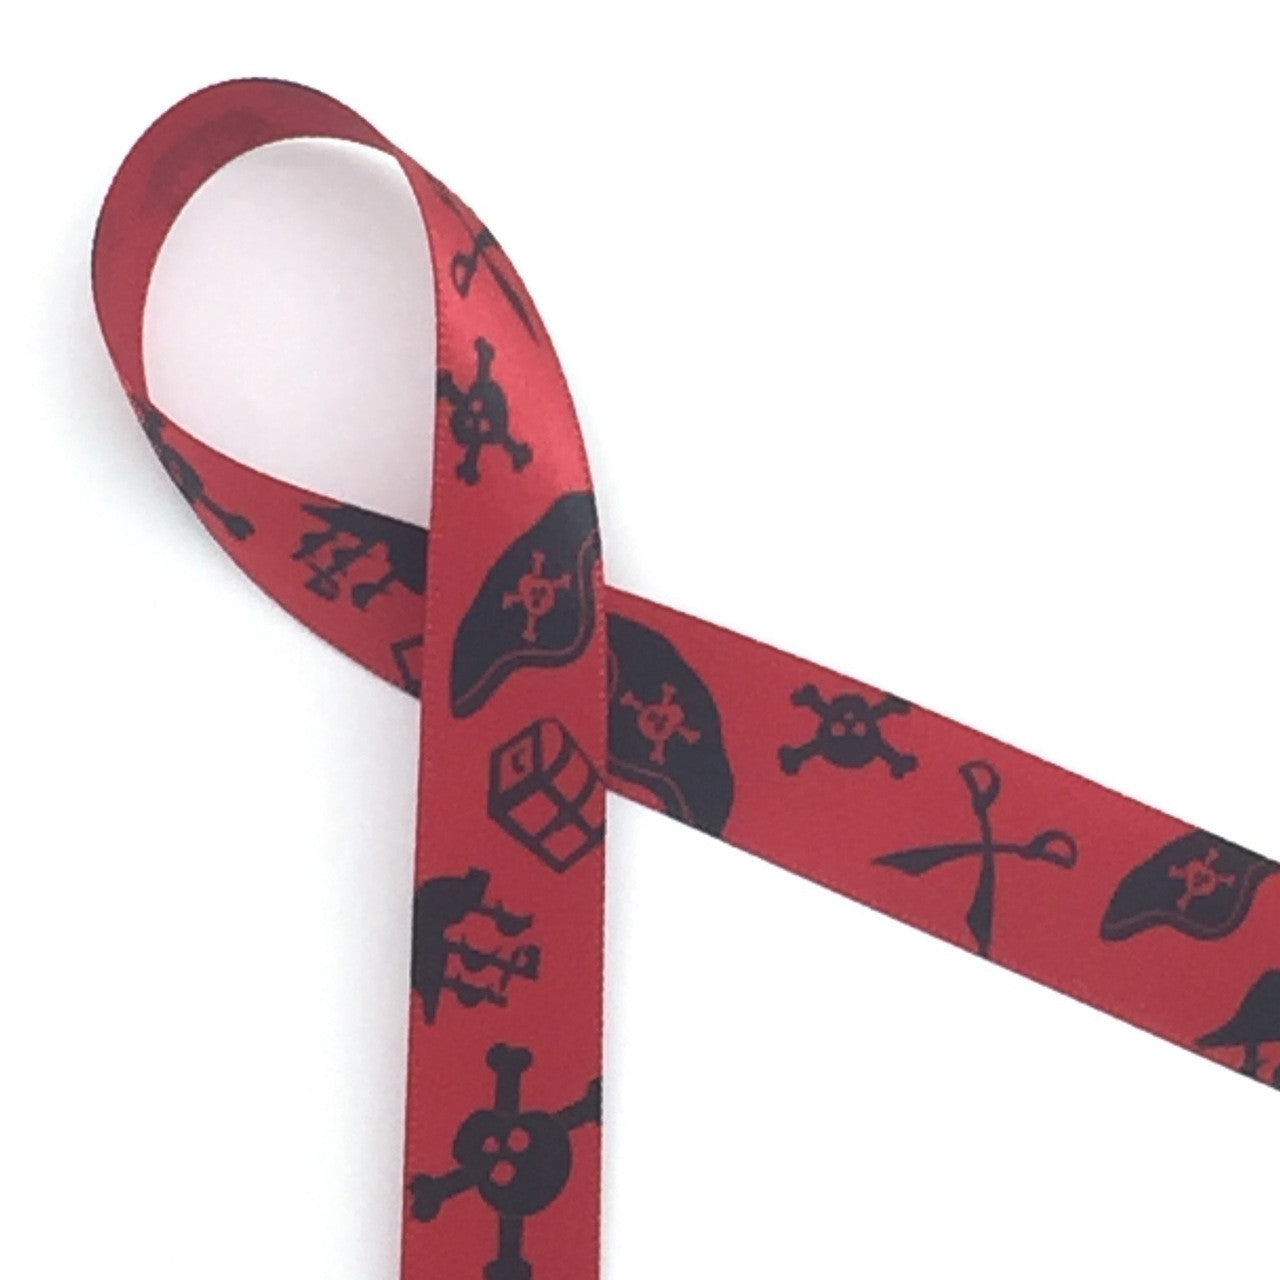 Pirate silhouettes in black on 5/8 red single face satin ribbon, 10 yards